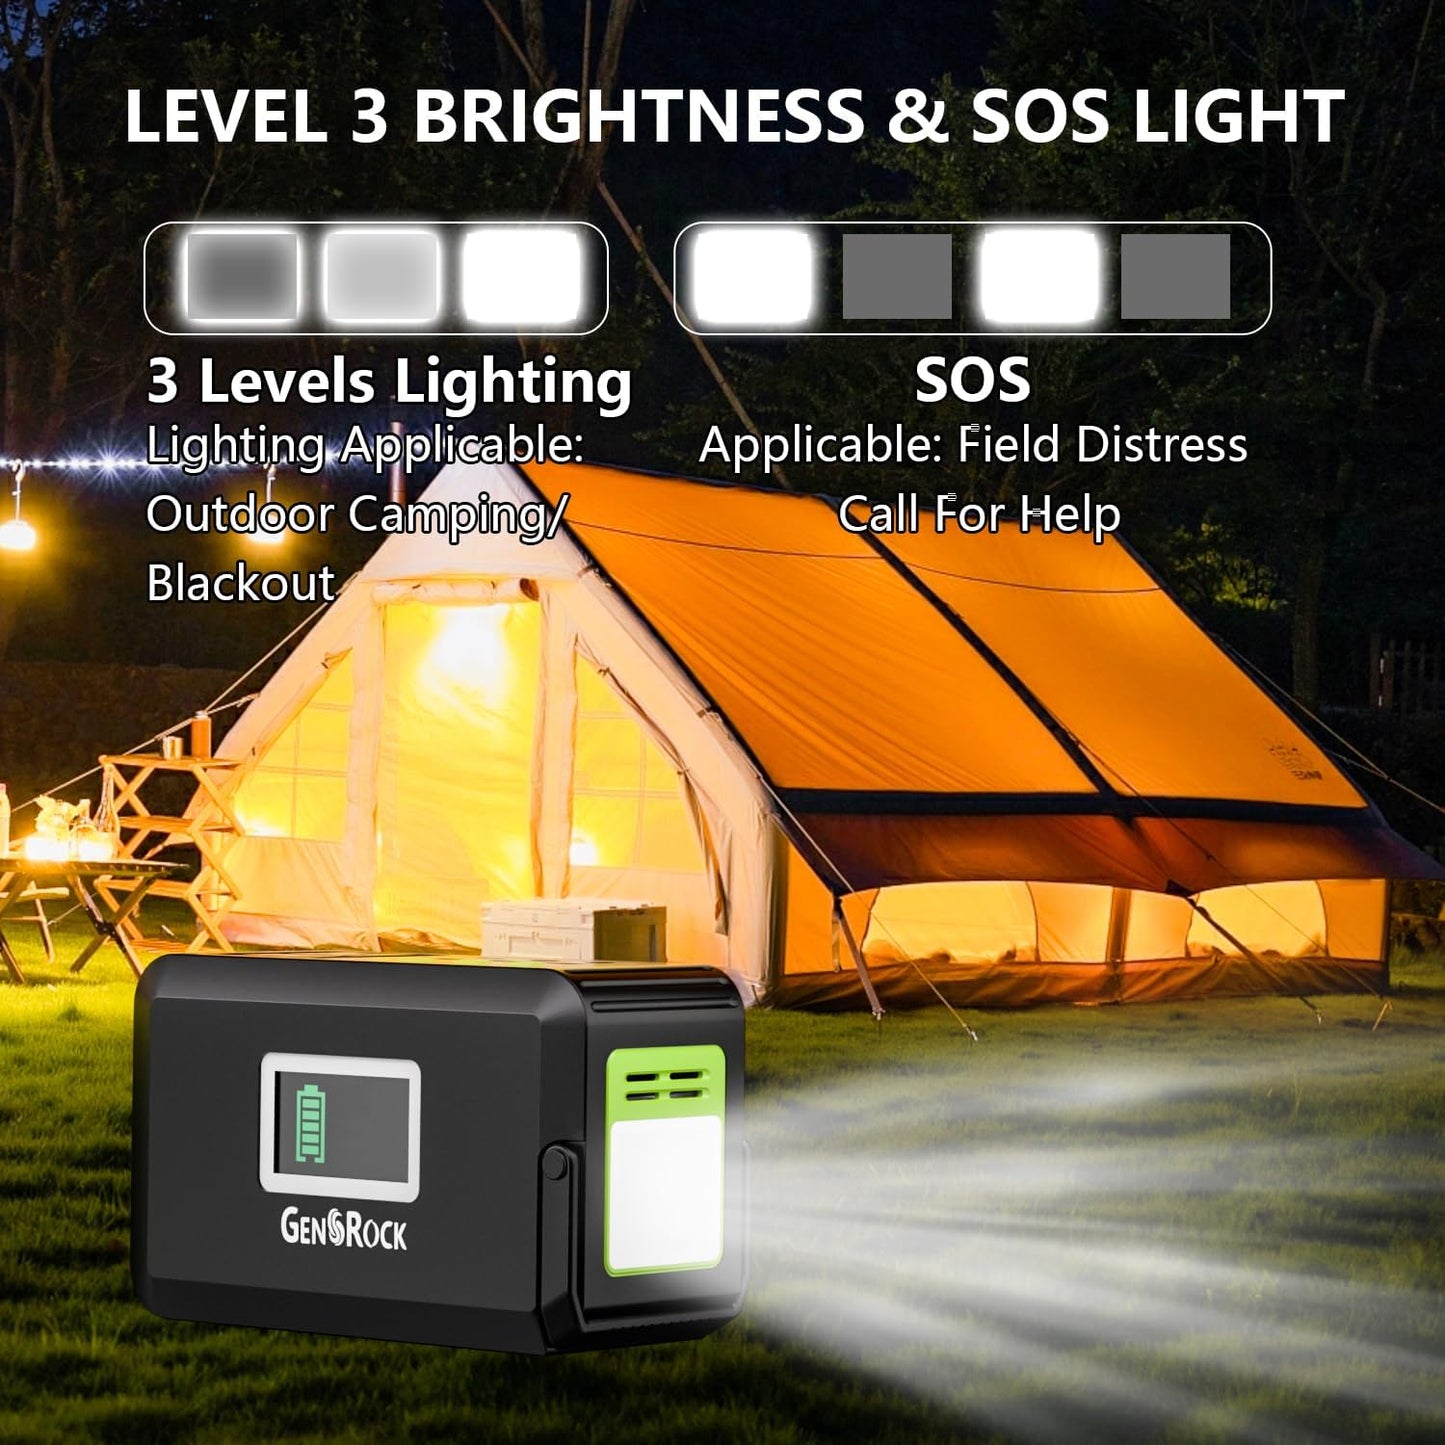 Portable Power Station, 88Wh Outdoor Solar Generator, Lithium Battery Power Bank with 110V/150W Peak AC Outlet,Qc 3.0, Type-C, LED Flashlight for CPAP Home Camping Travel Emergency.